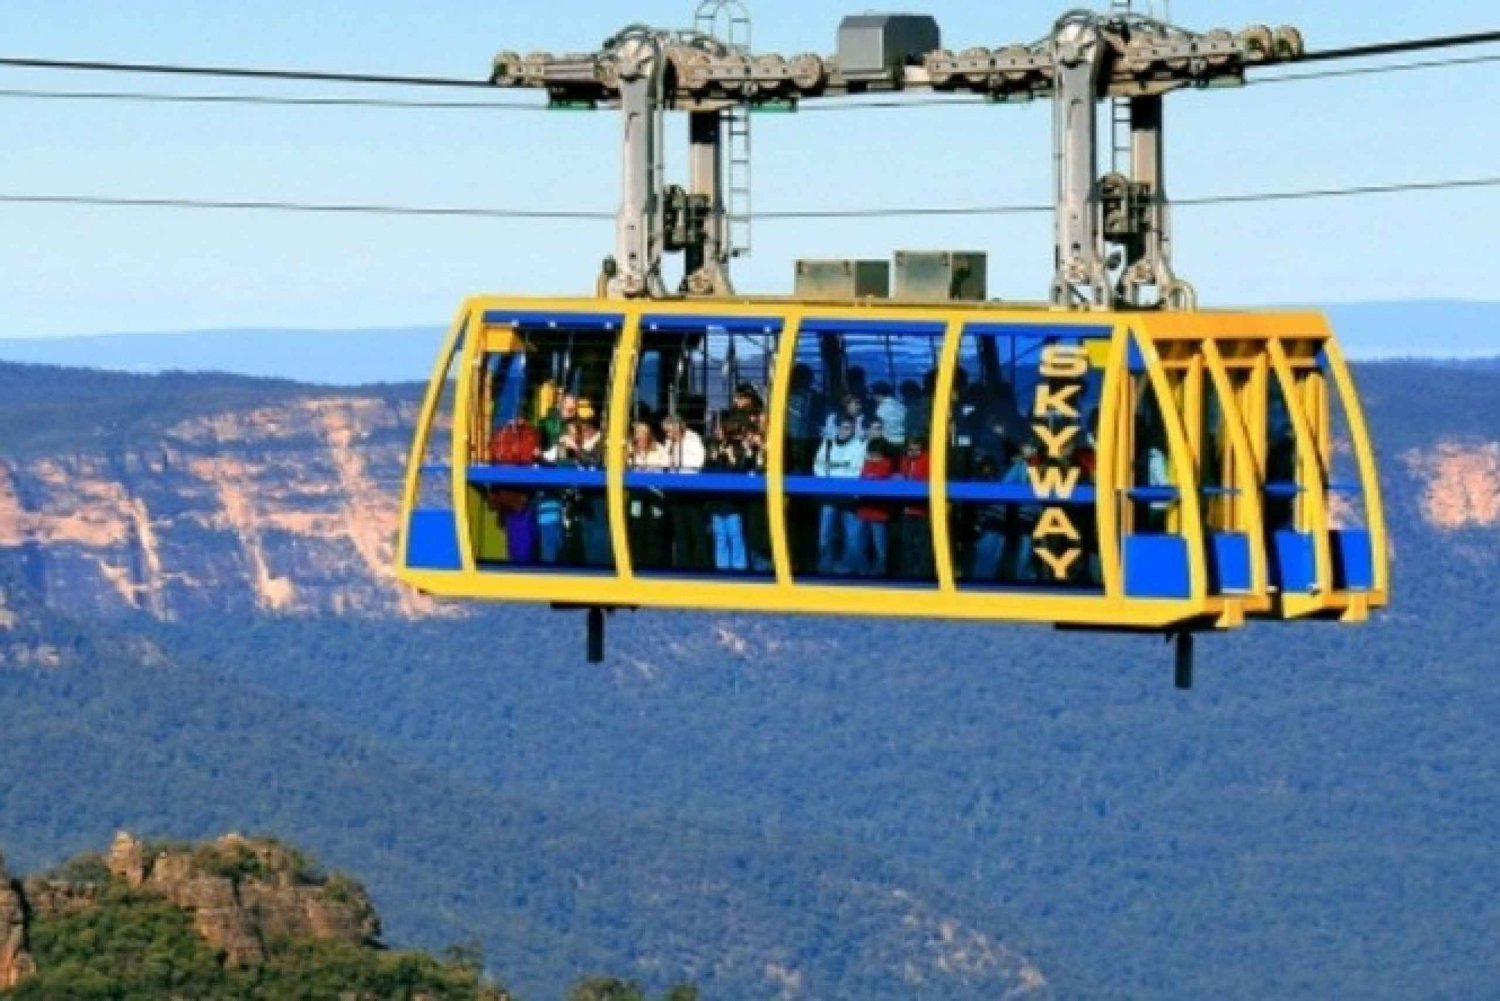 Sydney: Sydney Zoo, Blue Mountains and Scenic World Day Trip